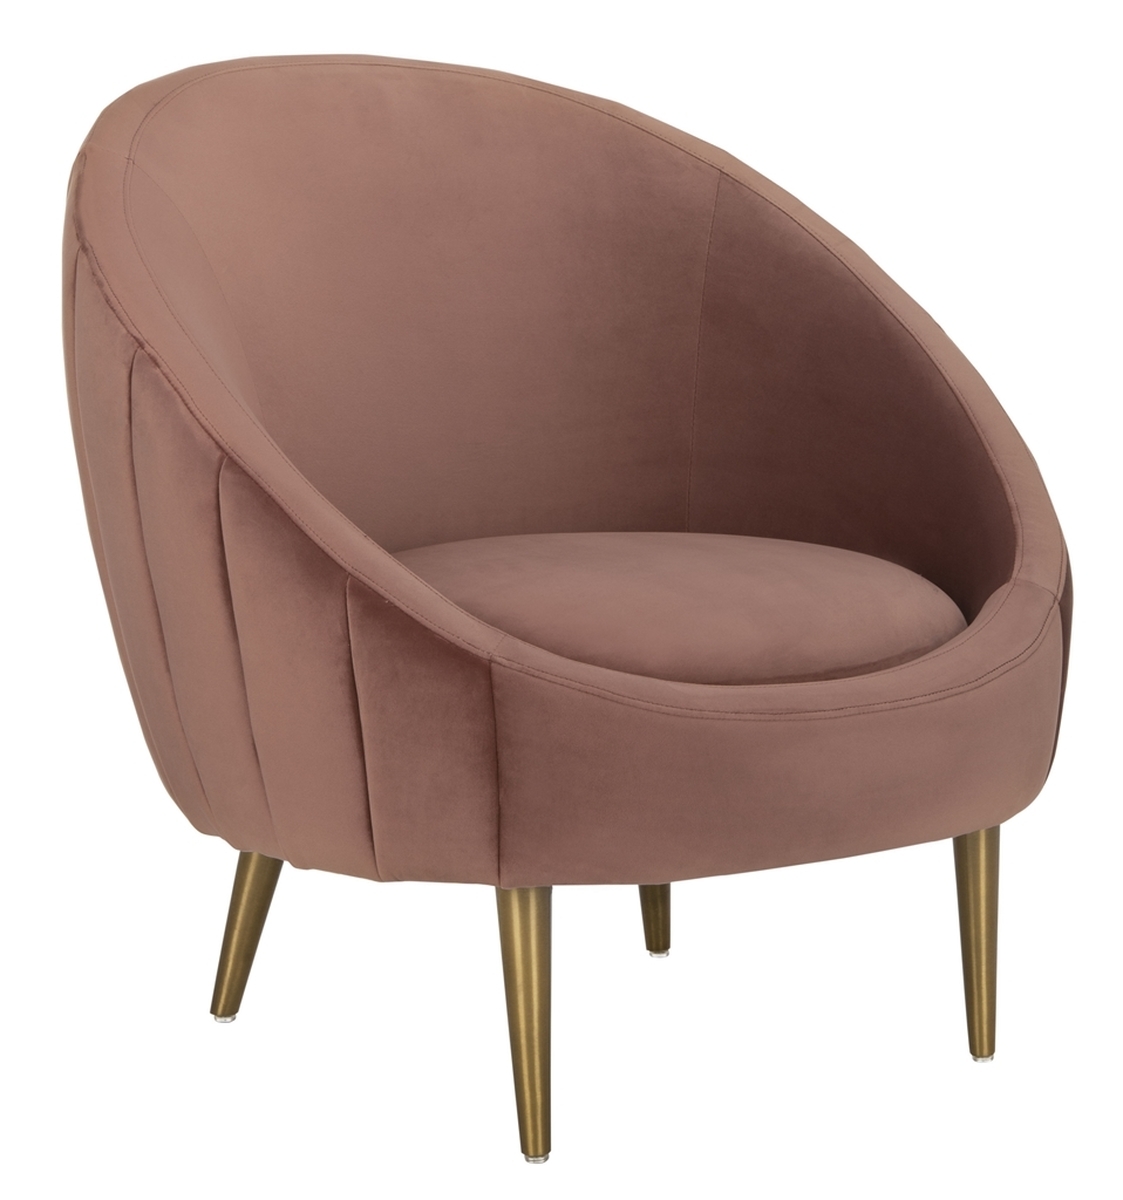 Razia Channel Tufted Tub Chair, Rose - Image 1